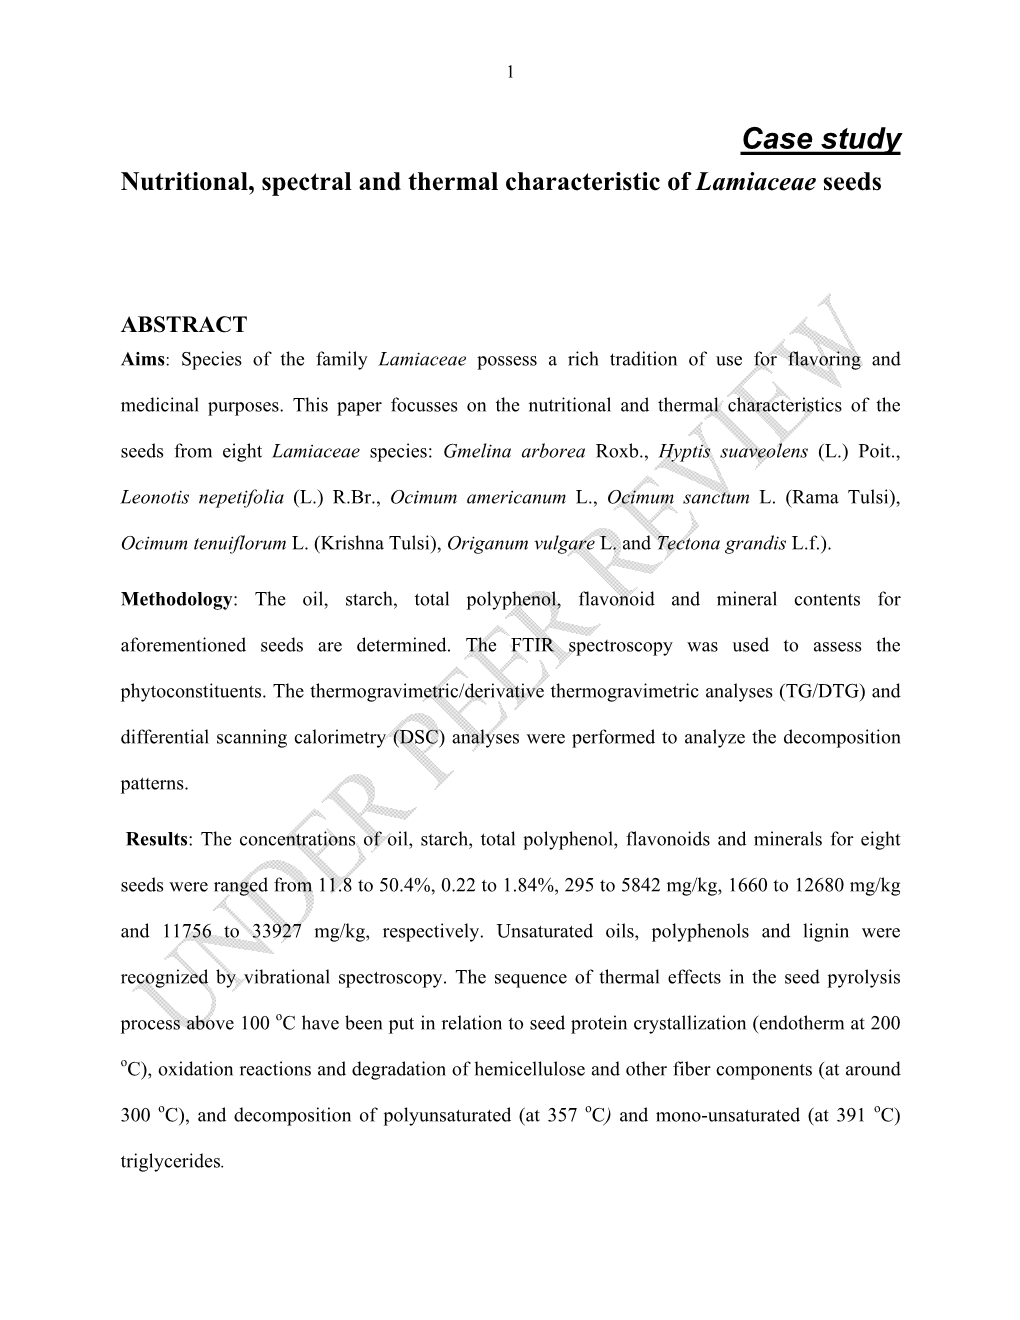 Case Study Nutritional, Spectral and Thermal Characteristic of Lamiaceae Seeds